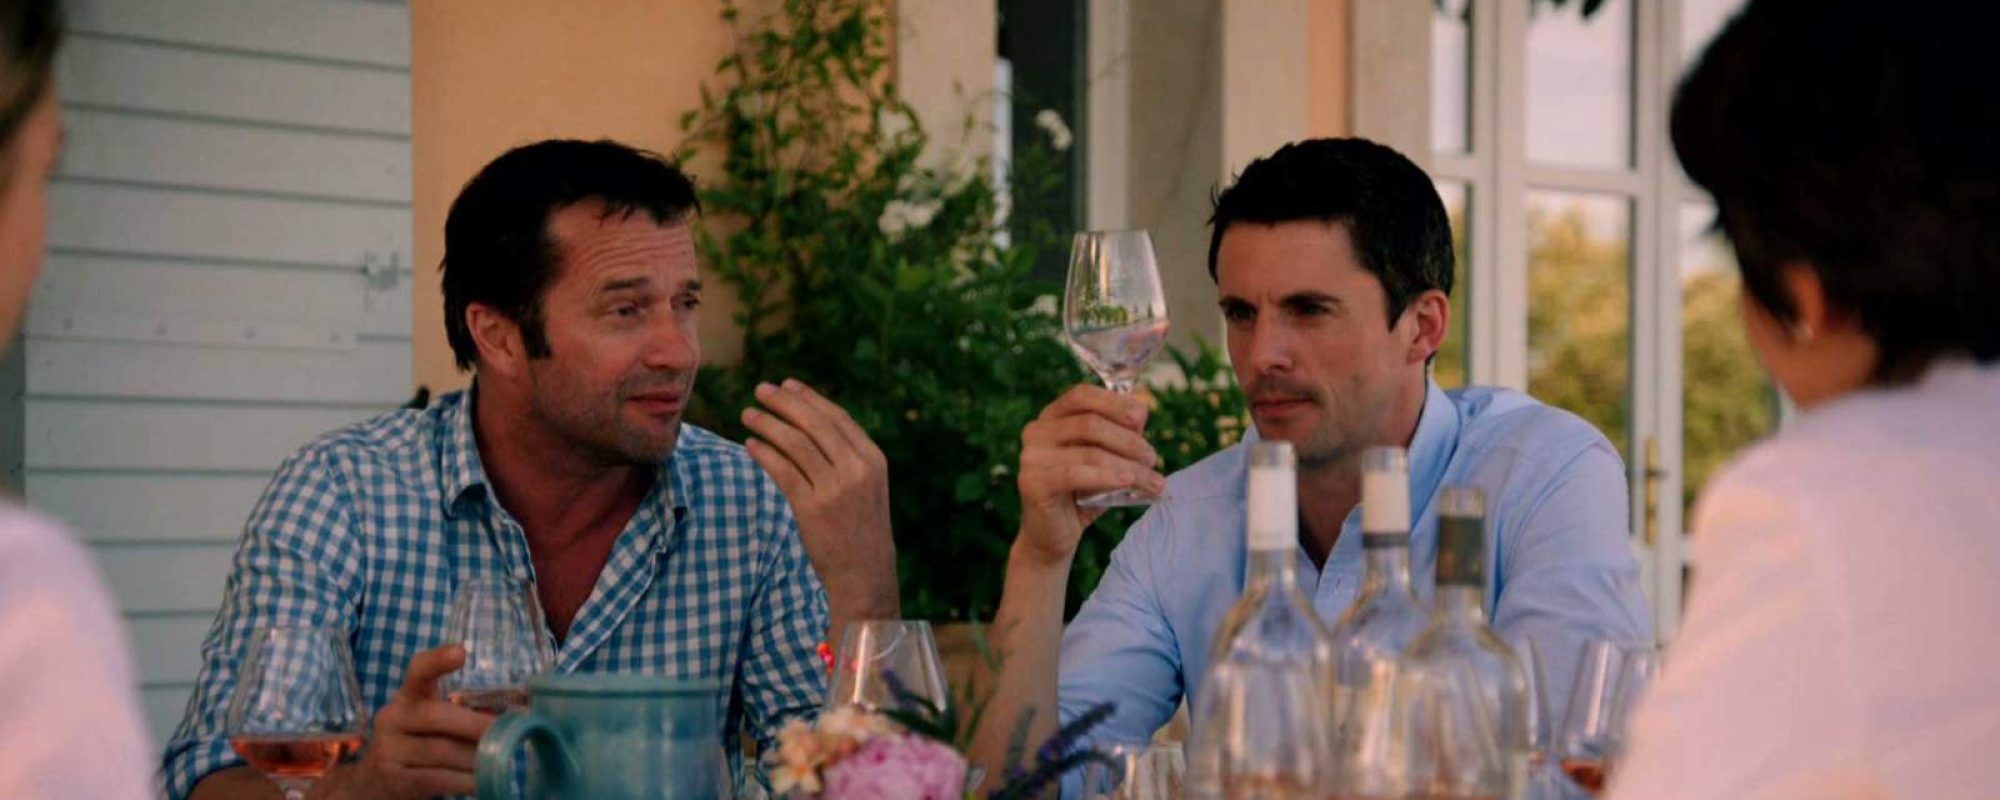 JAMES PUREFOY JOINS MATTHEW GOODE IN SEASON TWO OF “THE WINE SHOW” – PREMIERING ON OVATION TV NOVEMBER 15